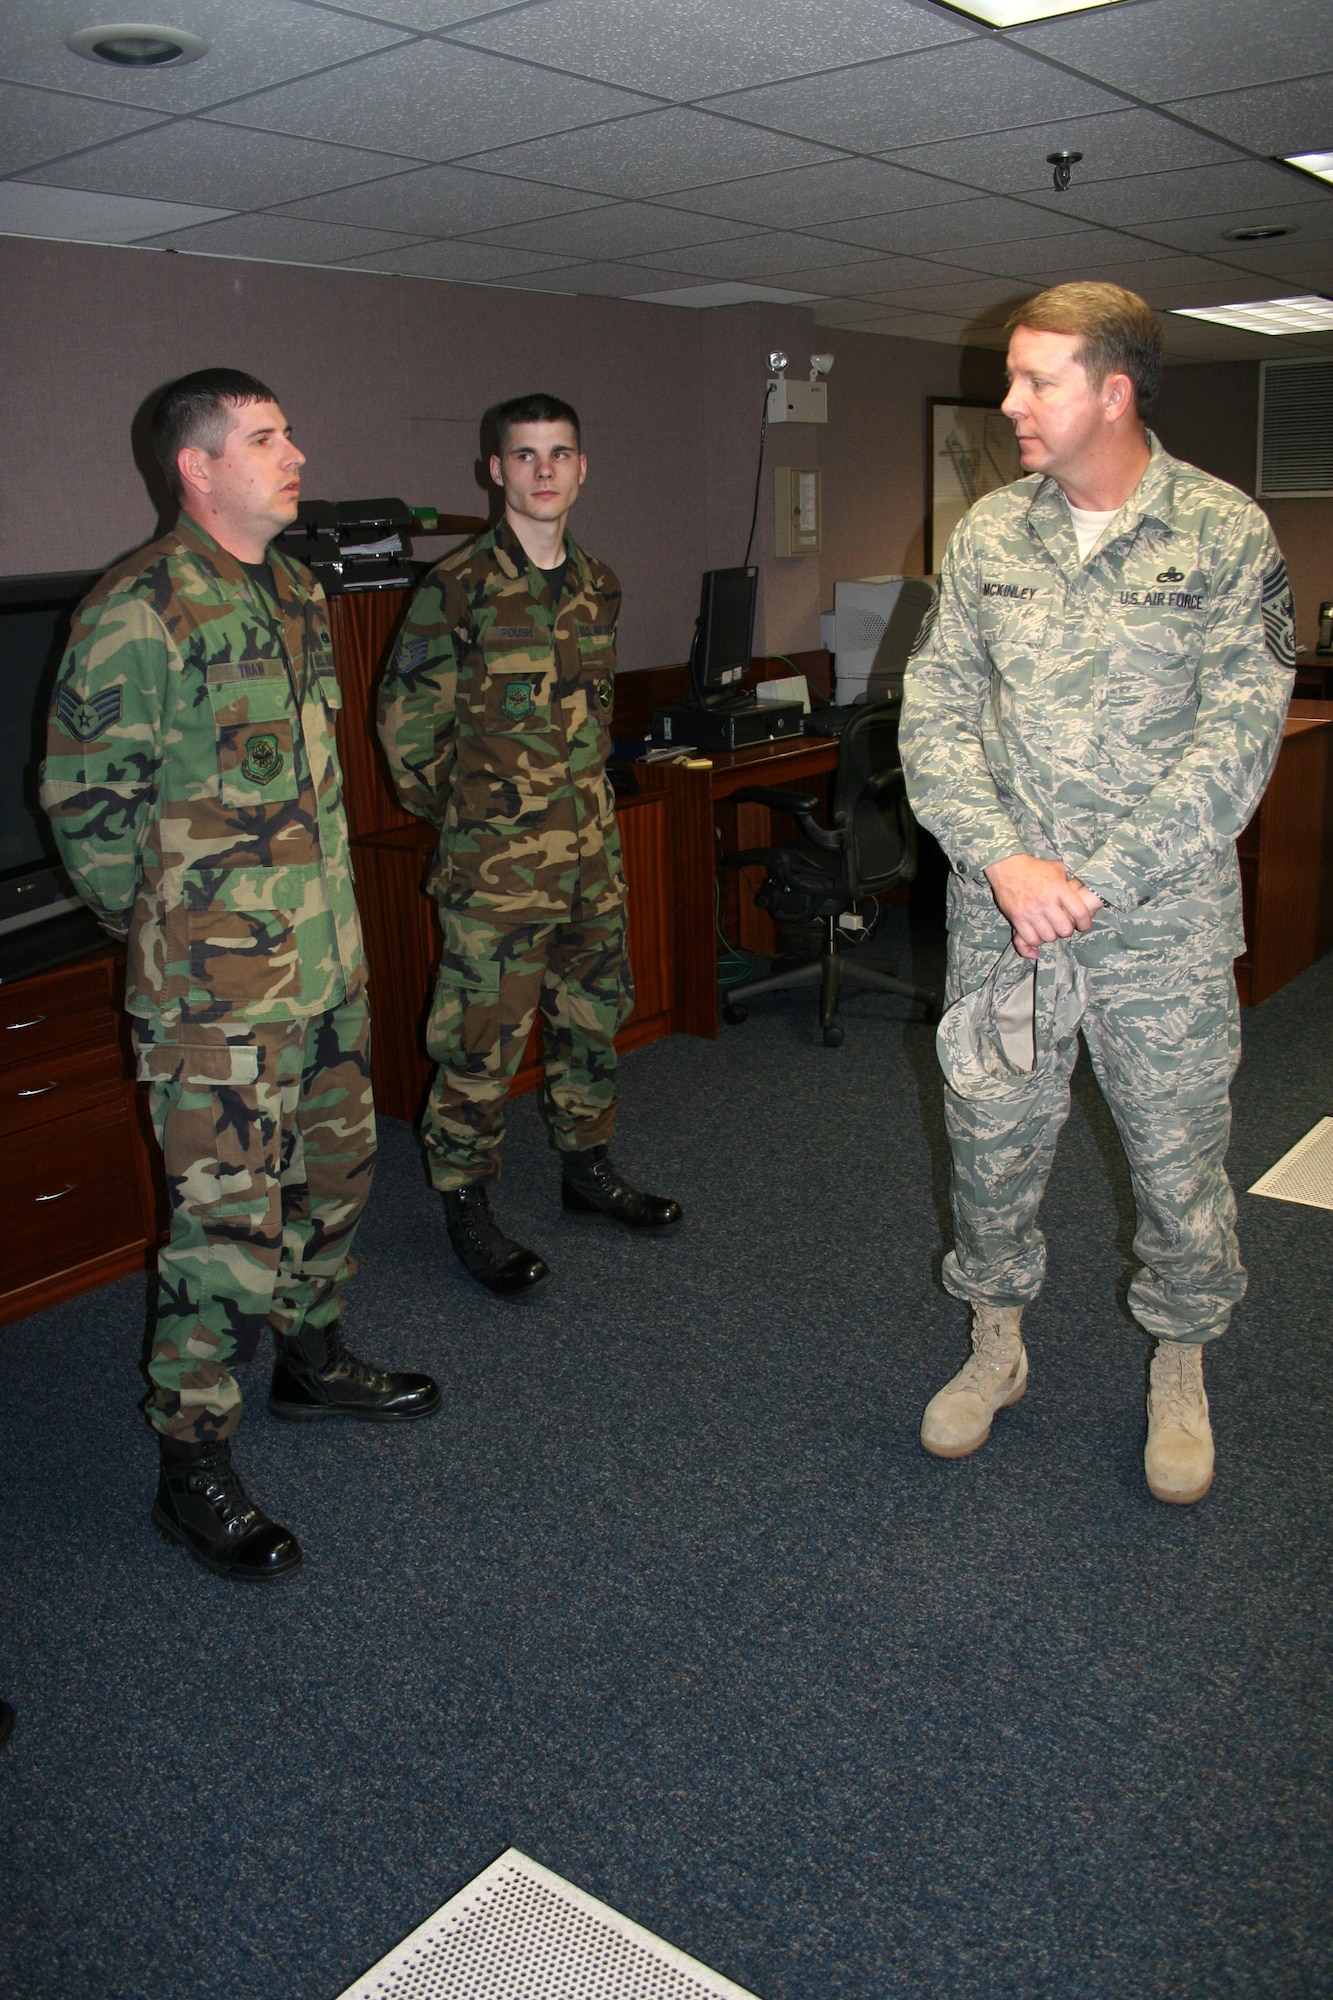 Chief Master Sgt. of the Air Force Rodney J. McKinley speaks with Staff Sergeants Kenneth Traw and Gregory Roush at Lajes Field, Azores. Chief McKinley is touring bases throughout the U.S. Air Forces in Europe promoting several new changes on the way, including uniforms, updated enlisted performance reports, and a warrior ethos. Sergeants Traw and Roush are from the 729th Air Mobility Squadron. (U.S. Air Force photo/Staff Sgt. Marcus McDonald)